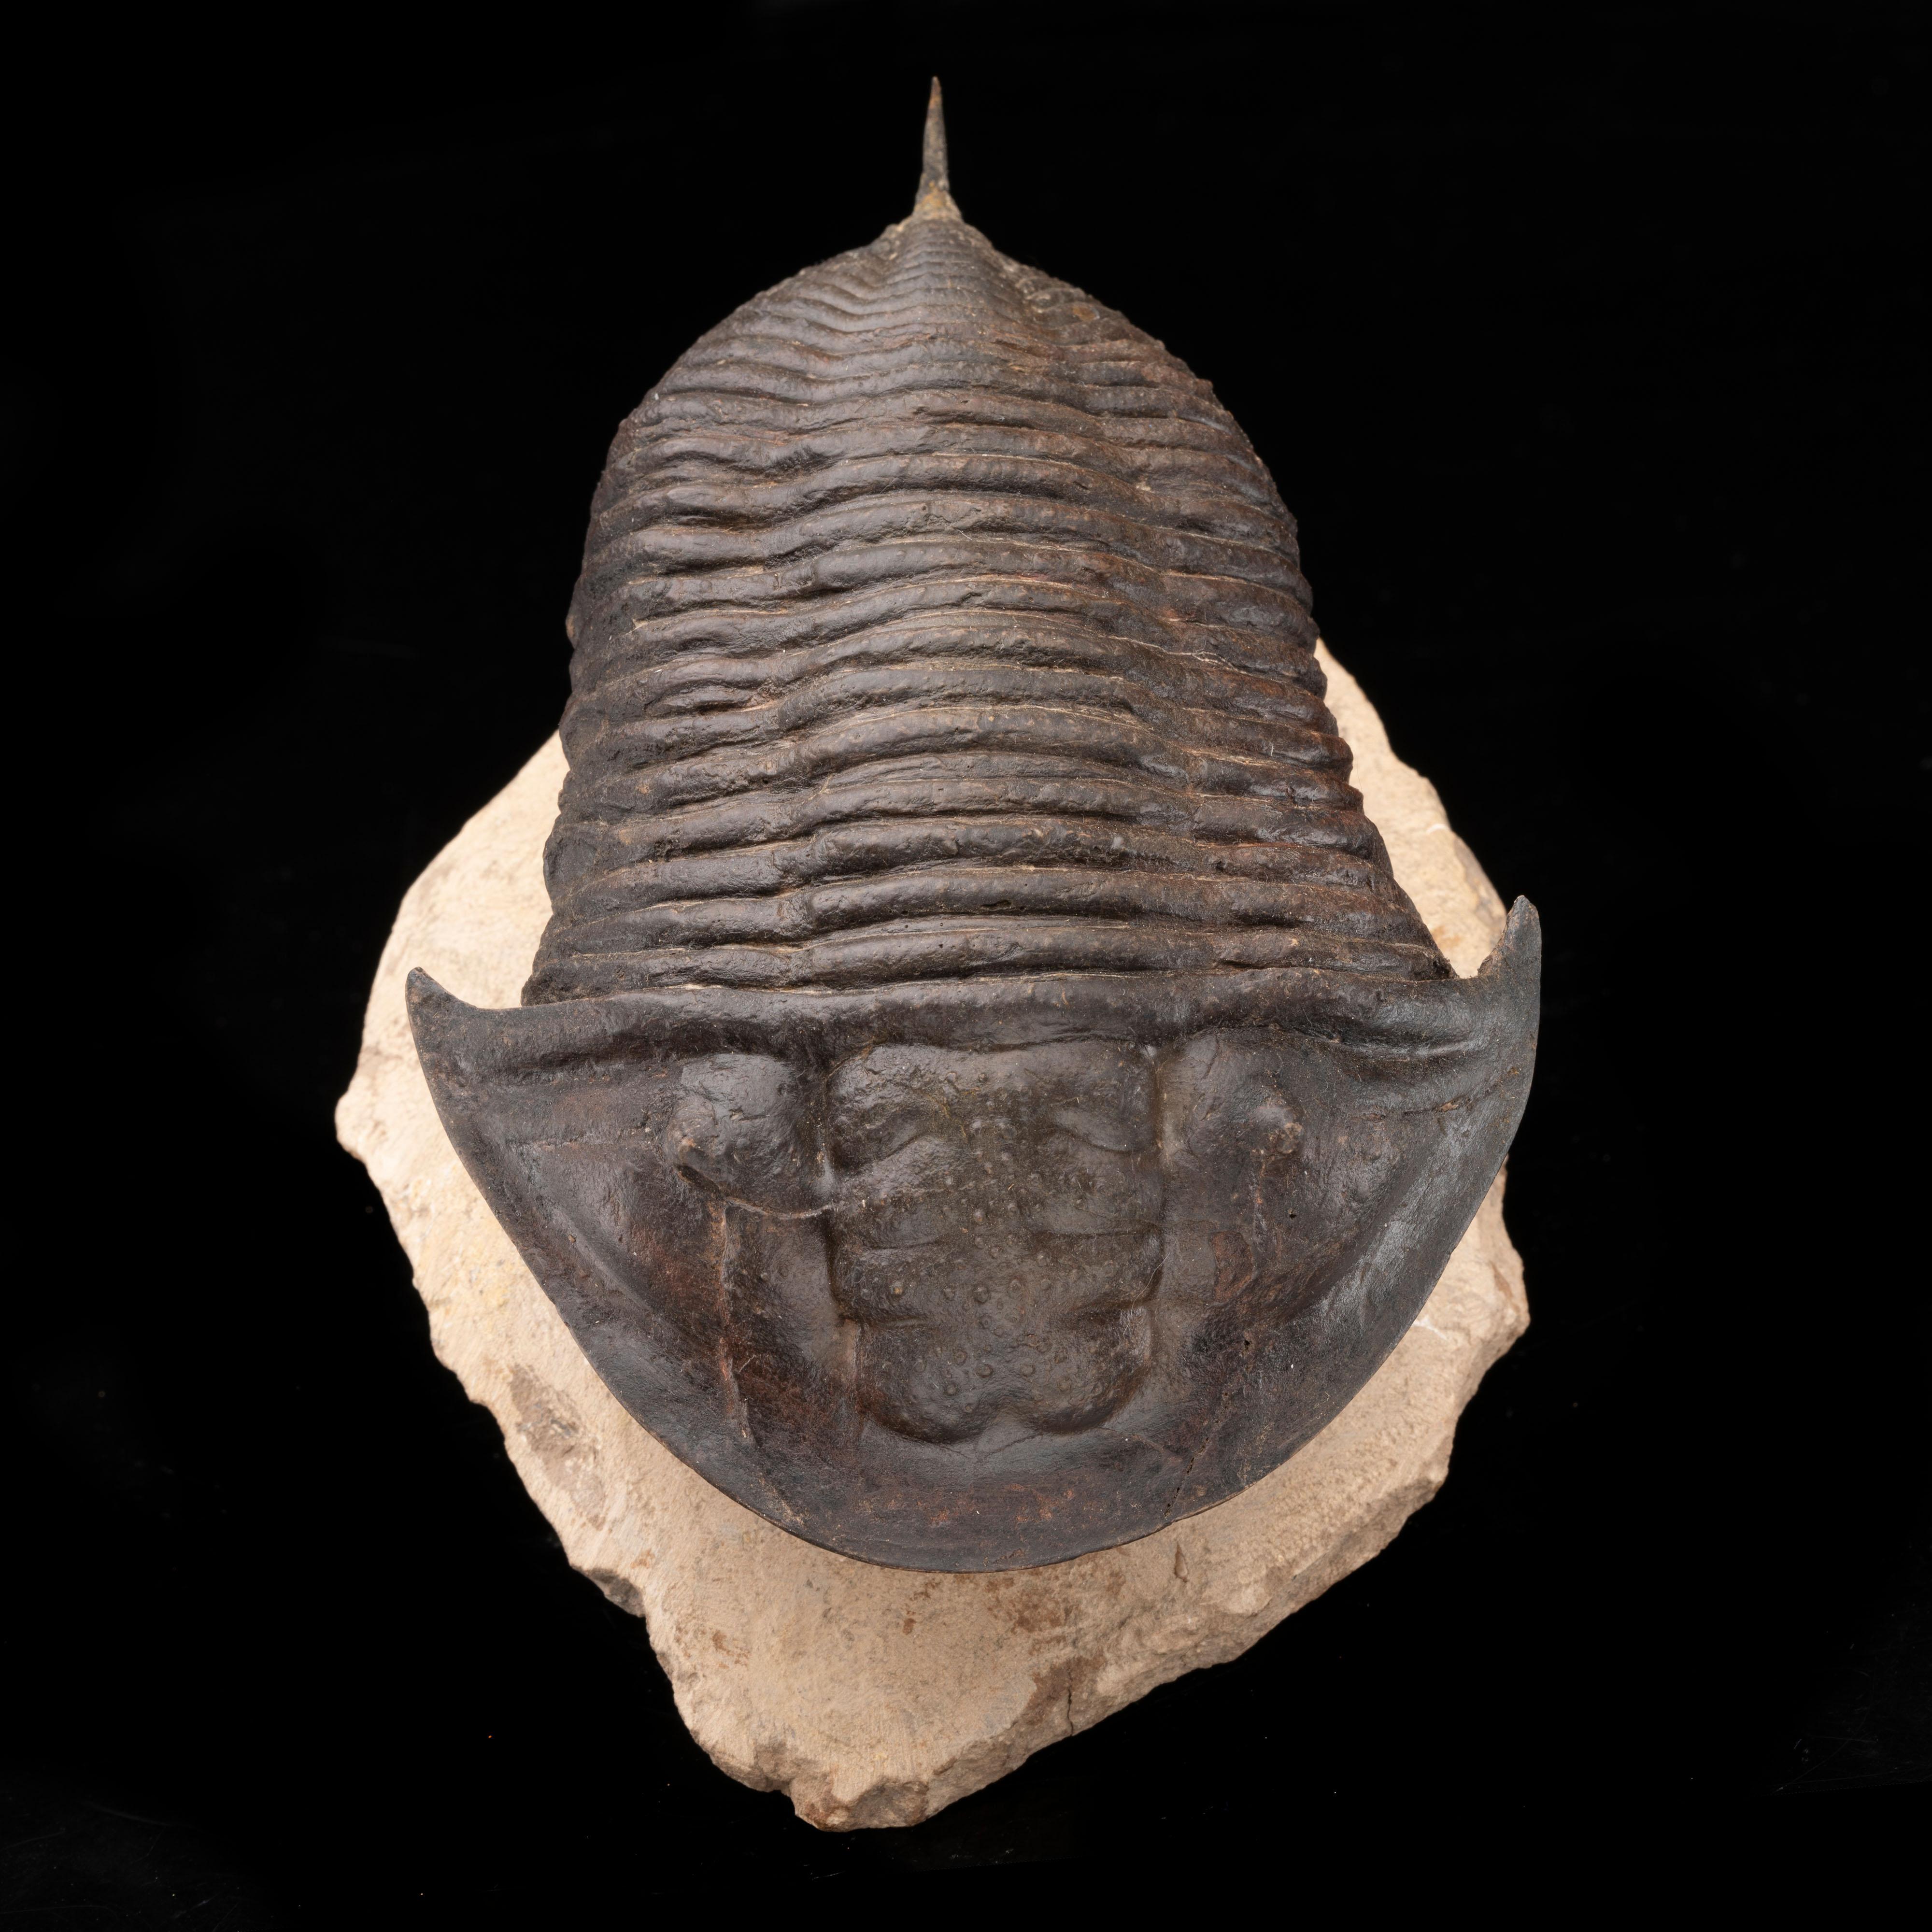 This is not your average trilobite. This specimen of the Burmeisterella genus was unearthed in Alnif, Morocco and hails from the Devonian period 419.2 to 358.9 million years ago. The genus is known for its large proportions and this incredibly well